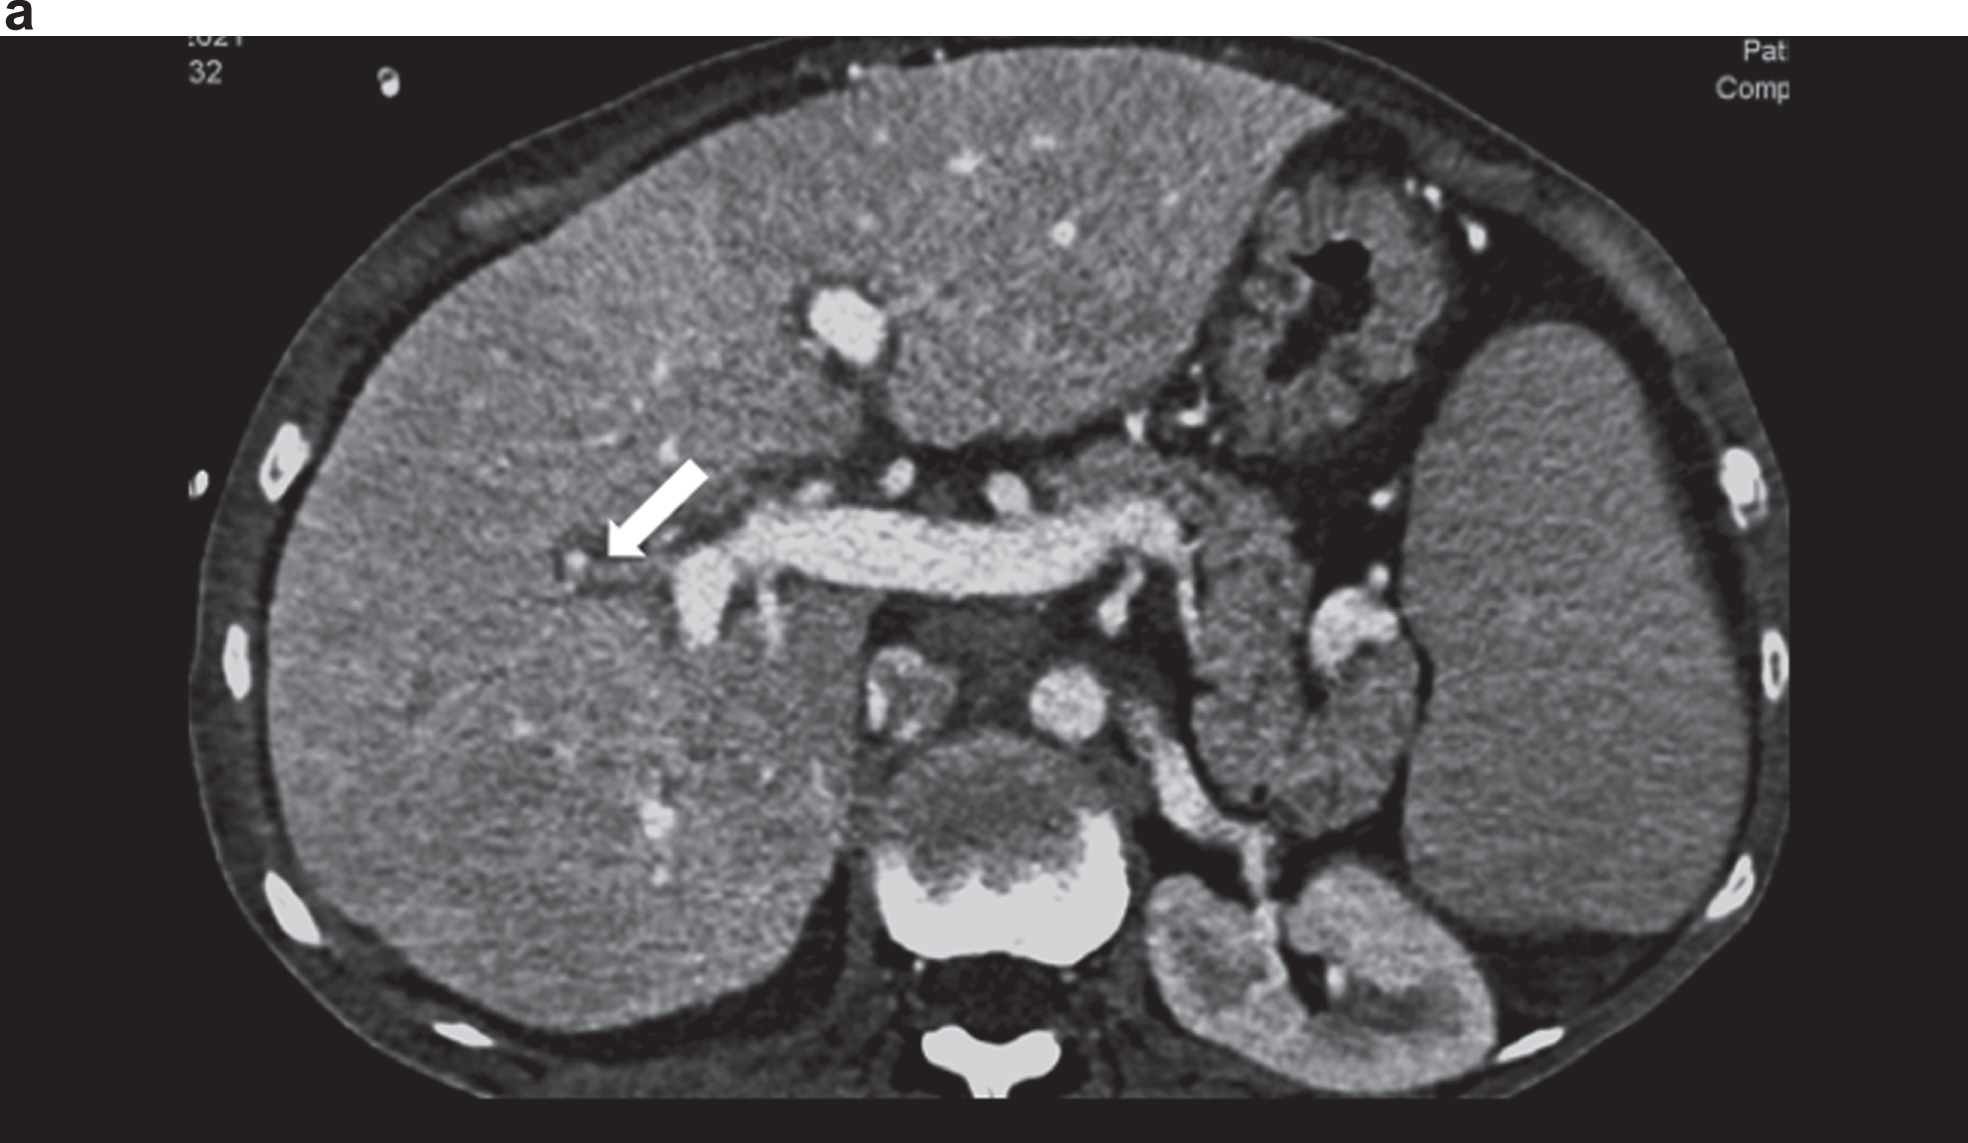 Contrast-enhanced CT showing an irregular hepatic artery (arrow), inhomogeneous contrast of the liver in cirrhosis and changes in angiosarcoma in the right lobe of the liver.